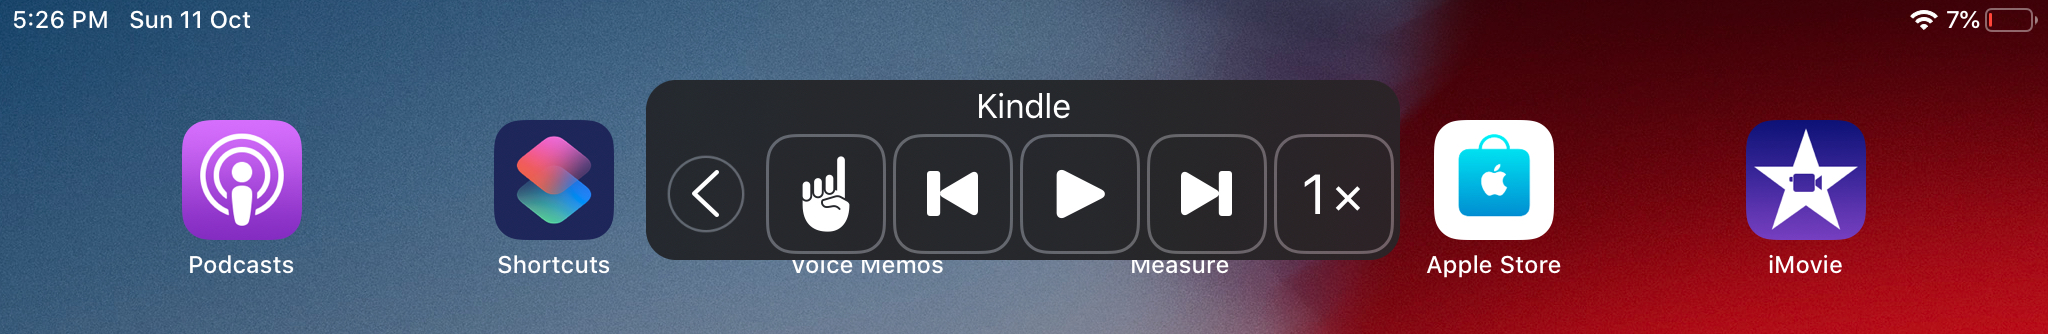 how to logout of kindle on iphone